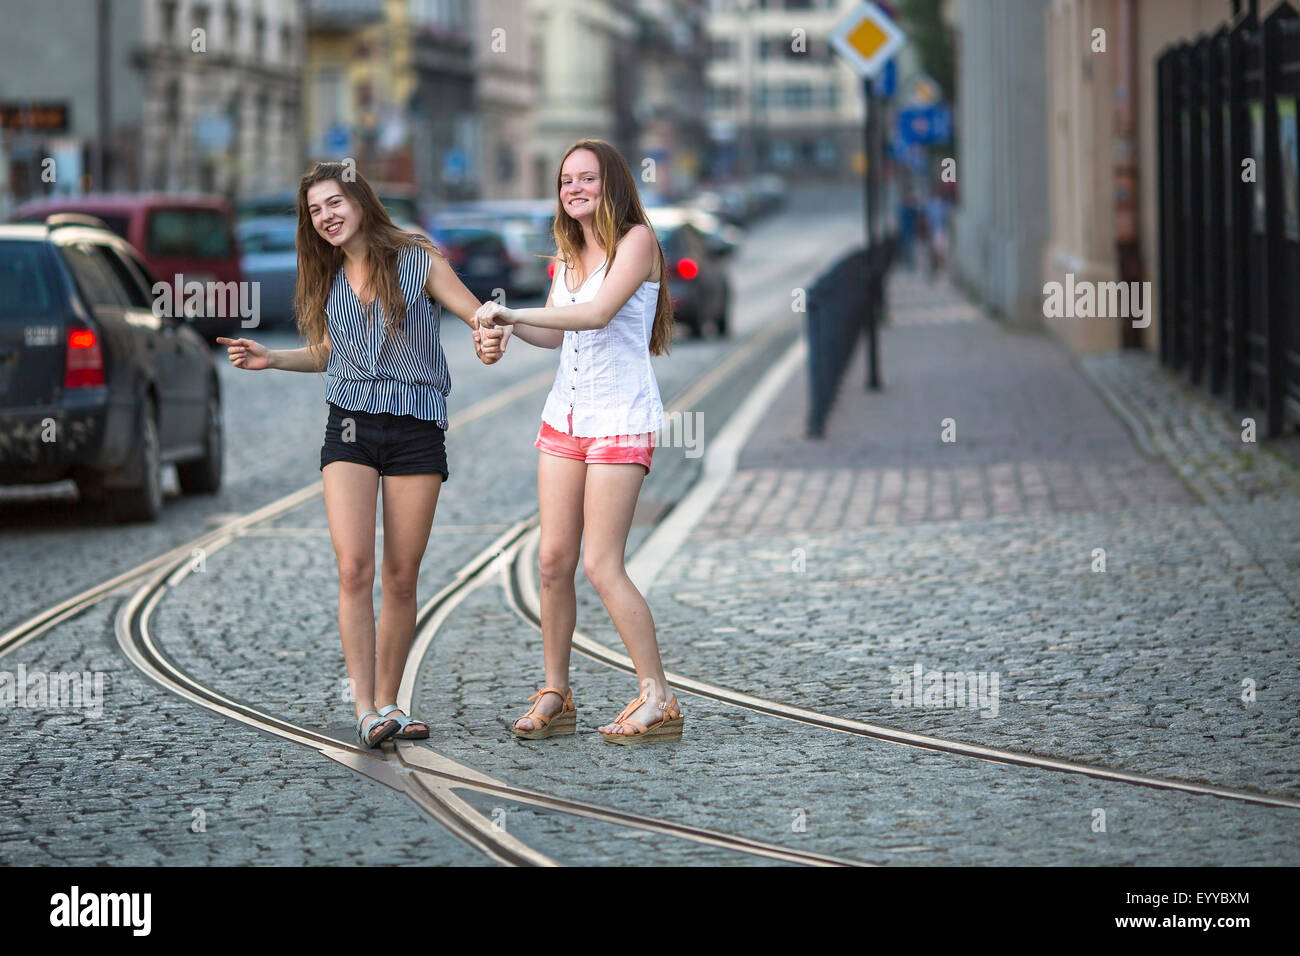 Funny teenage girls together walking on the pavement on the street. Stock Photo